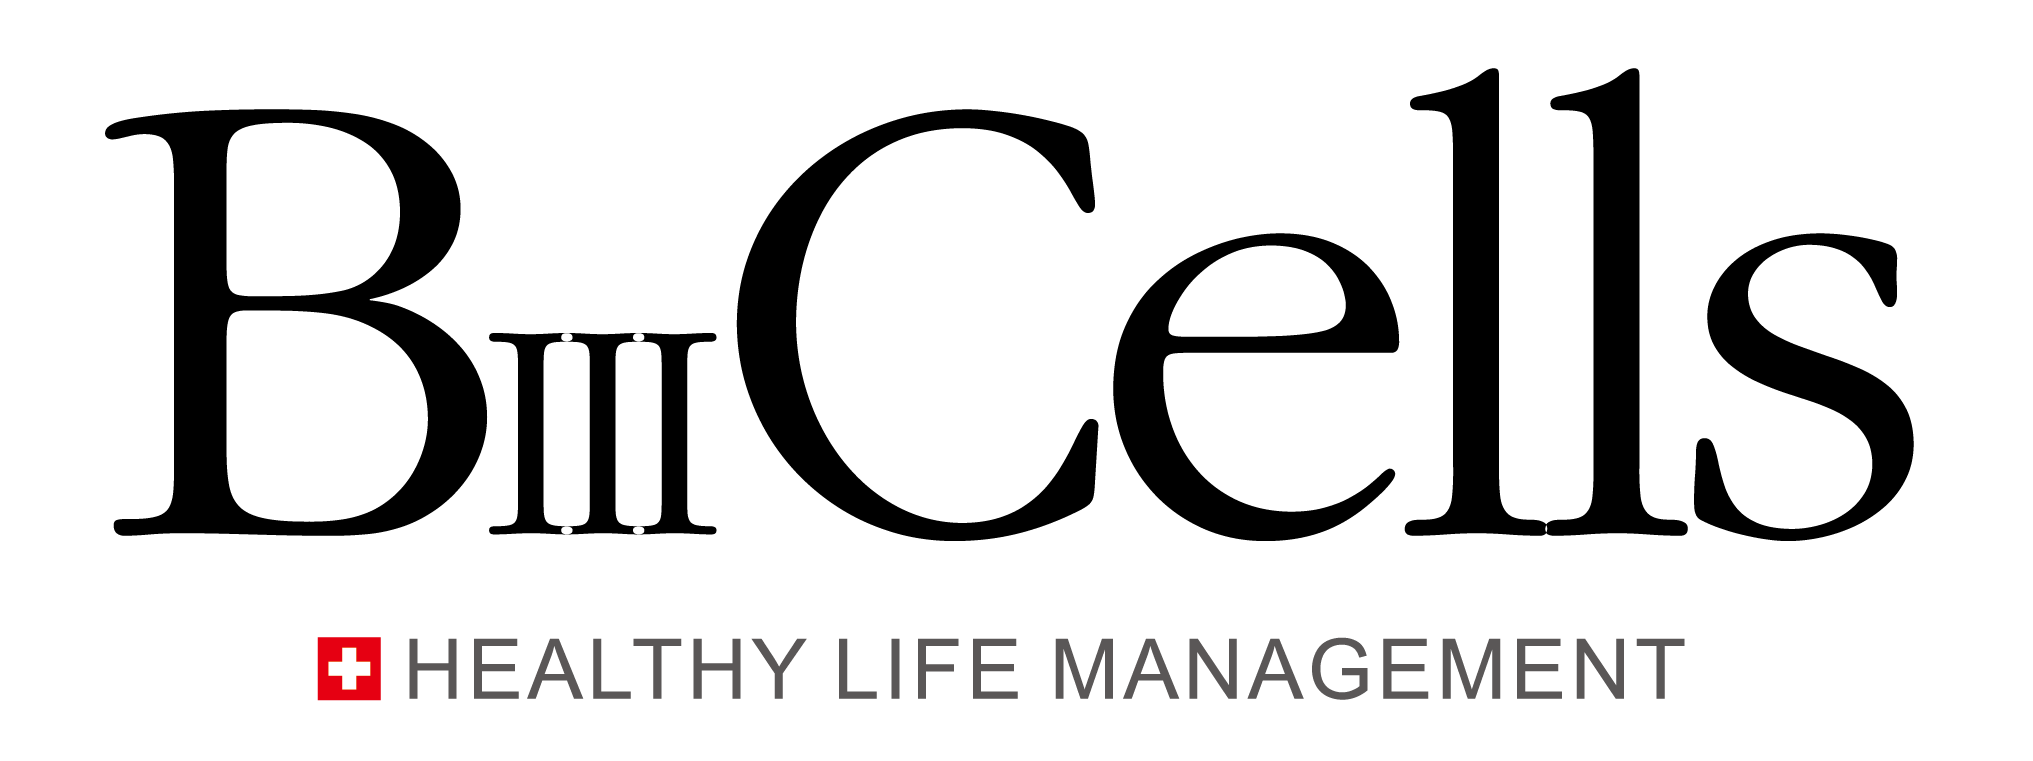 BιιιCELLS-HEALTHY LIFE MANAGEMENT